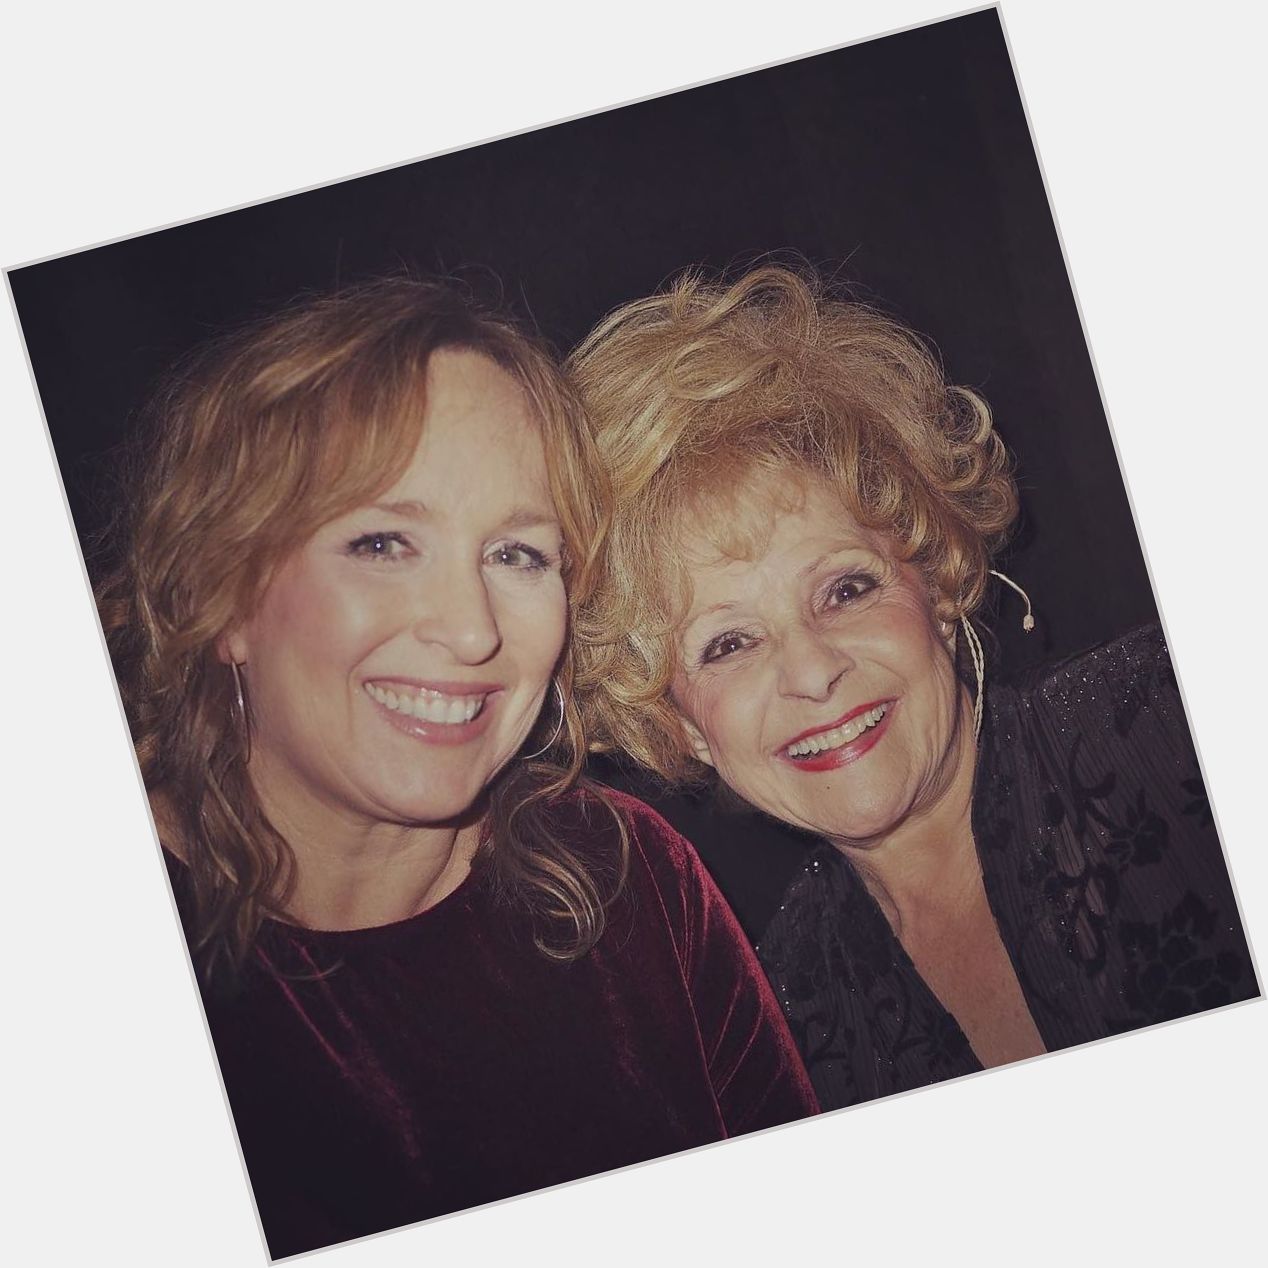 Happy birthday today to the unstoppable, wonderful Brenda Lee! 